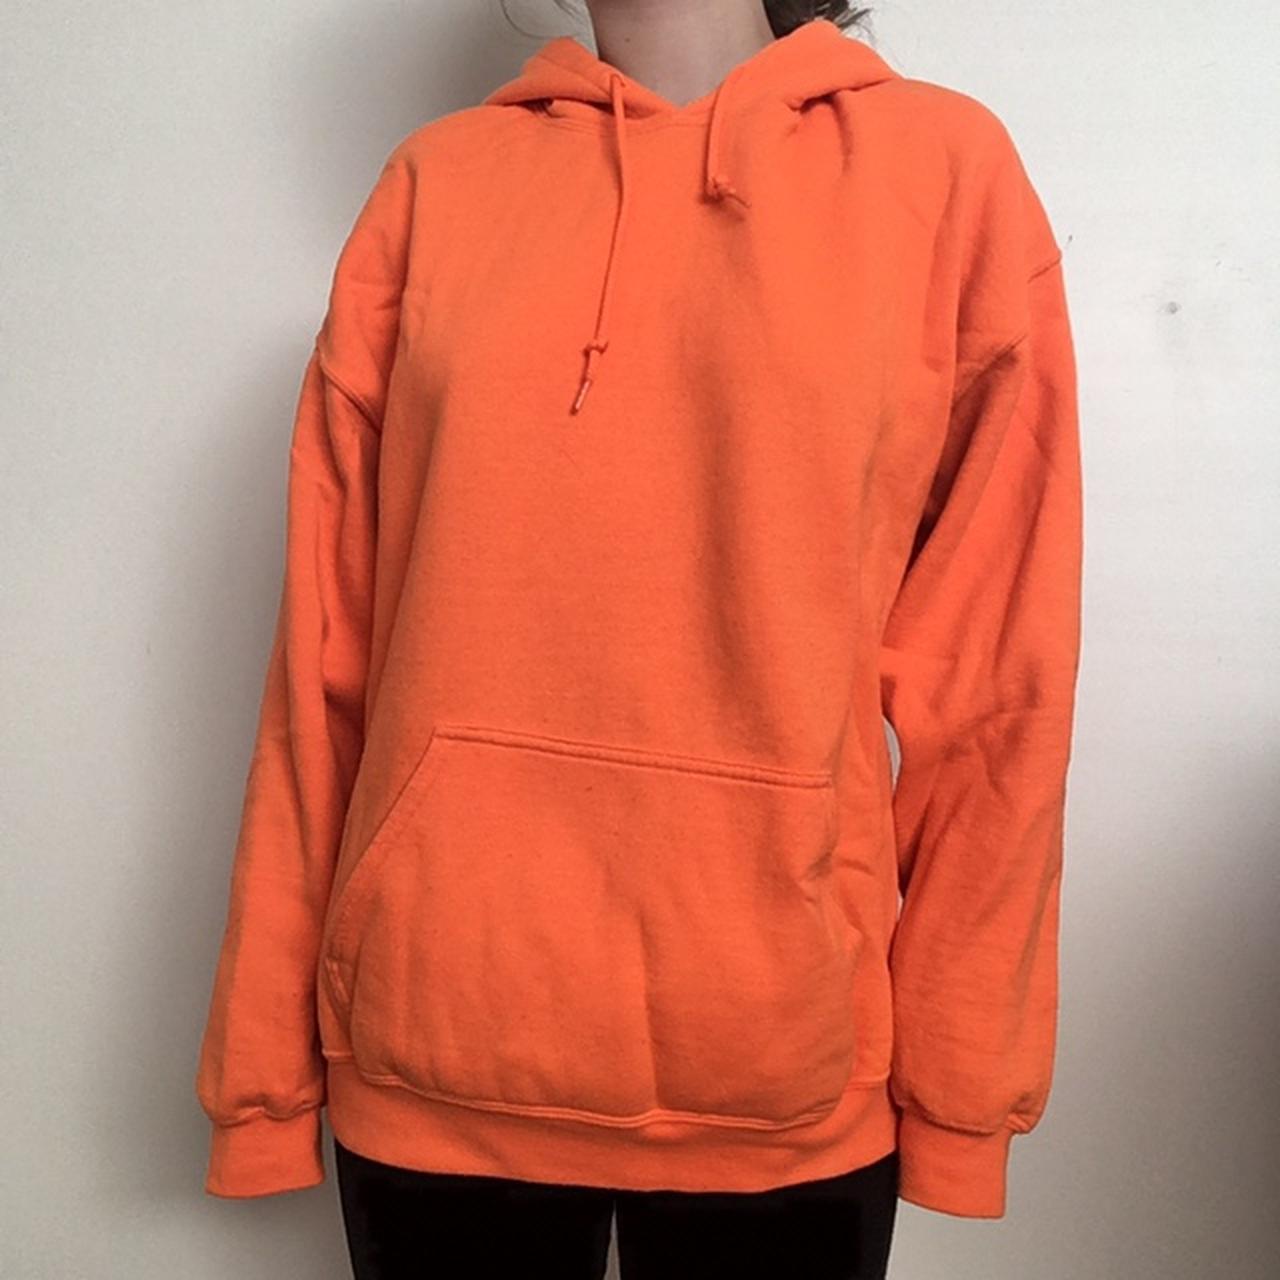 Oversized orange hoodie with I don’t care and rose... - Depop